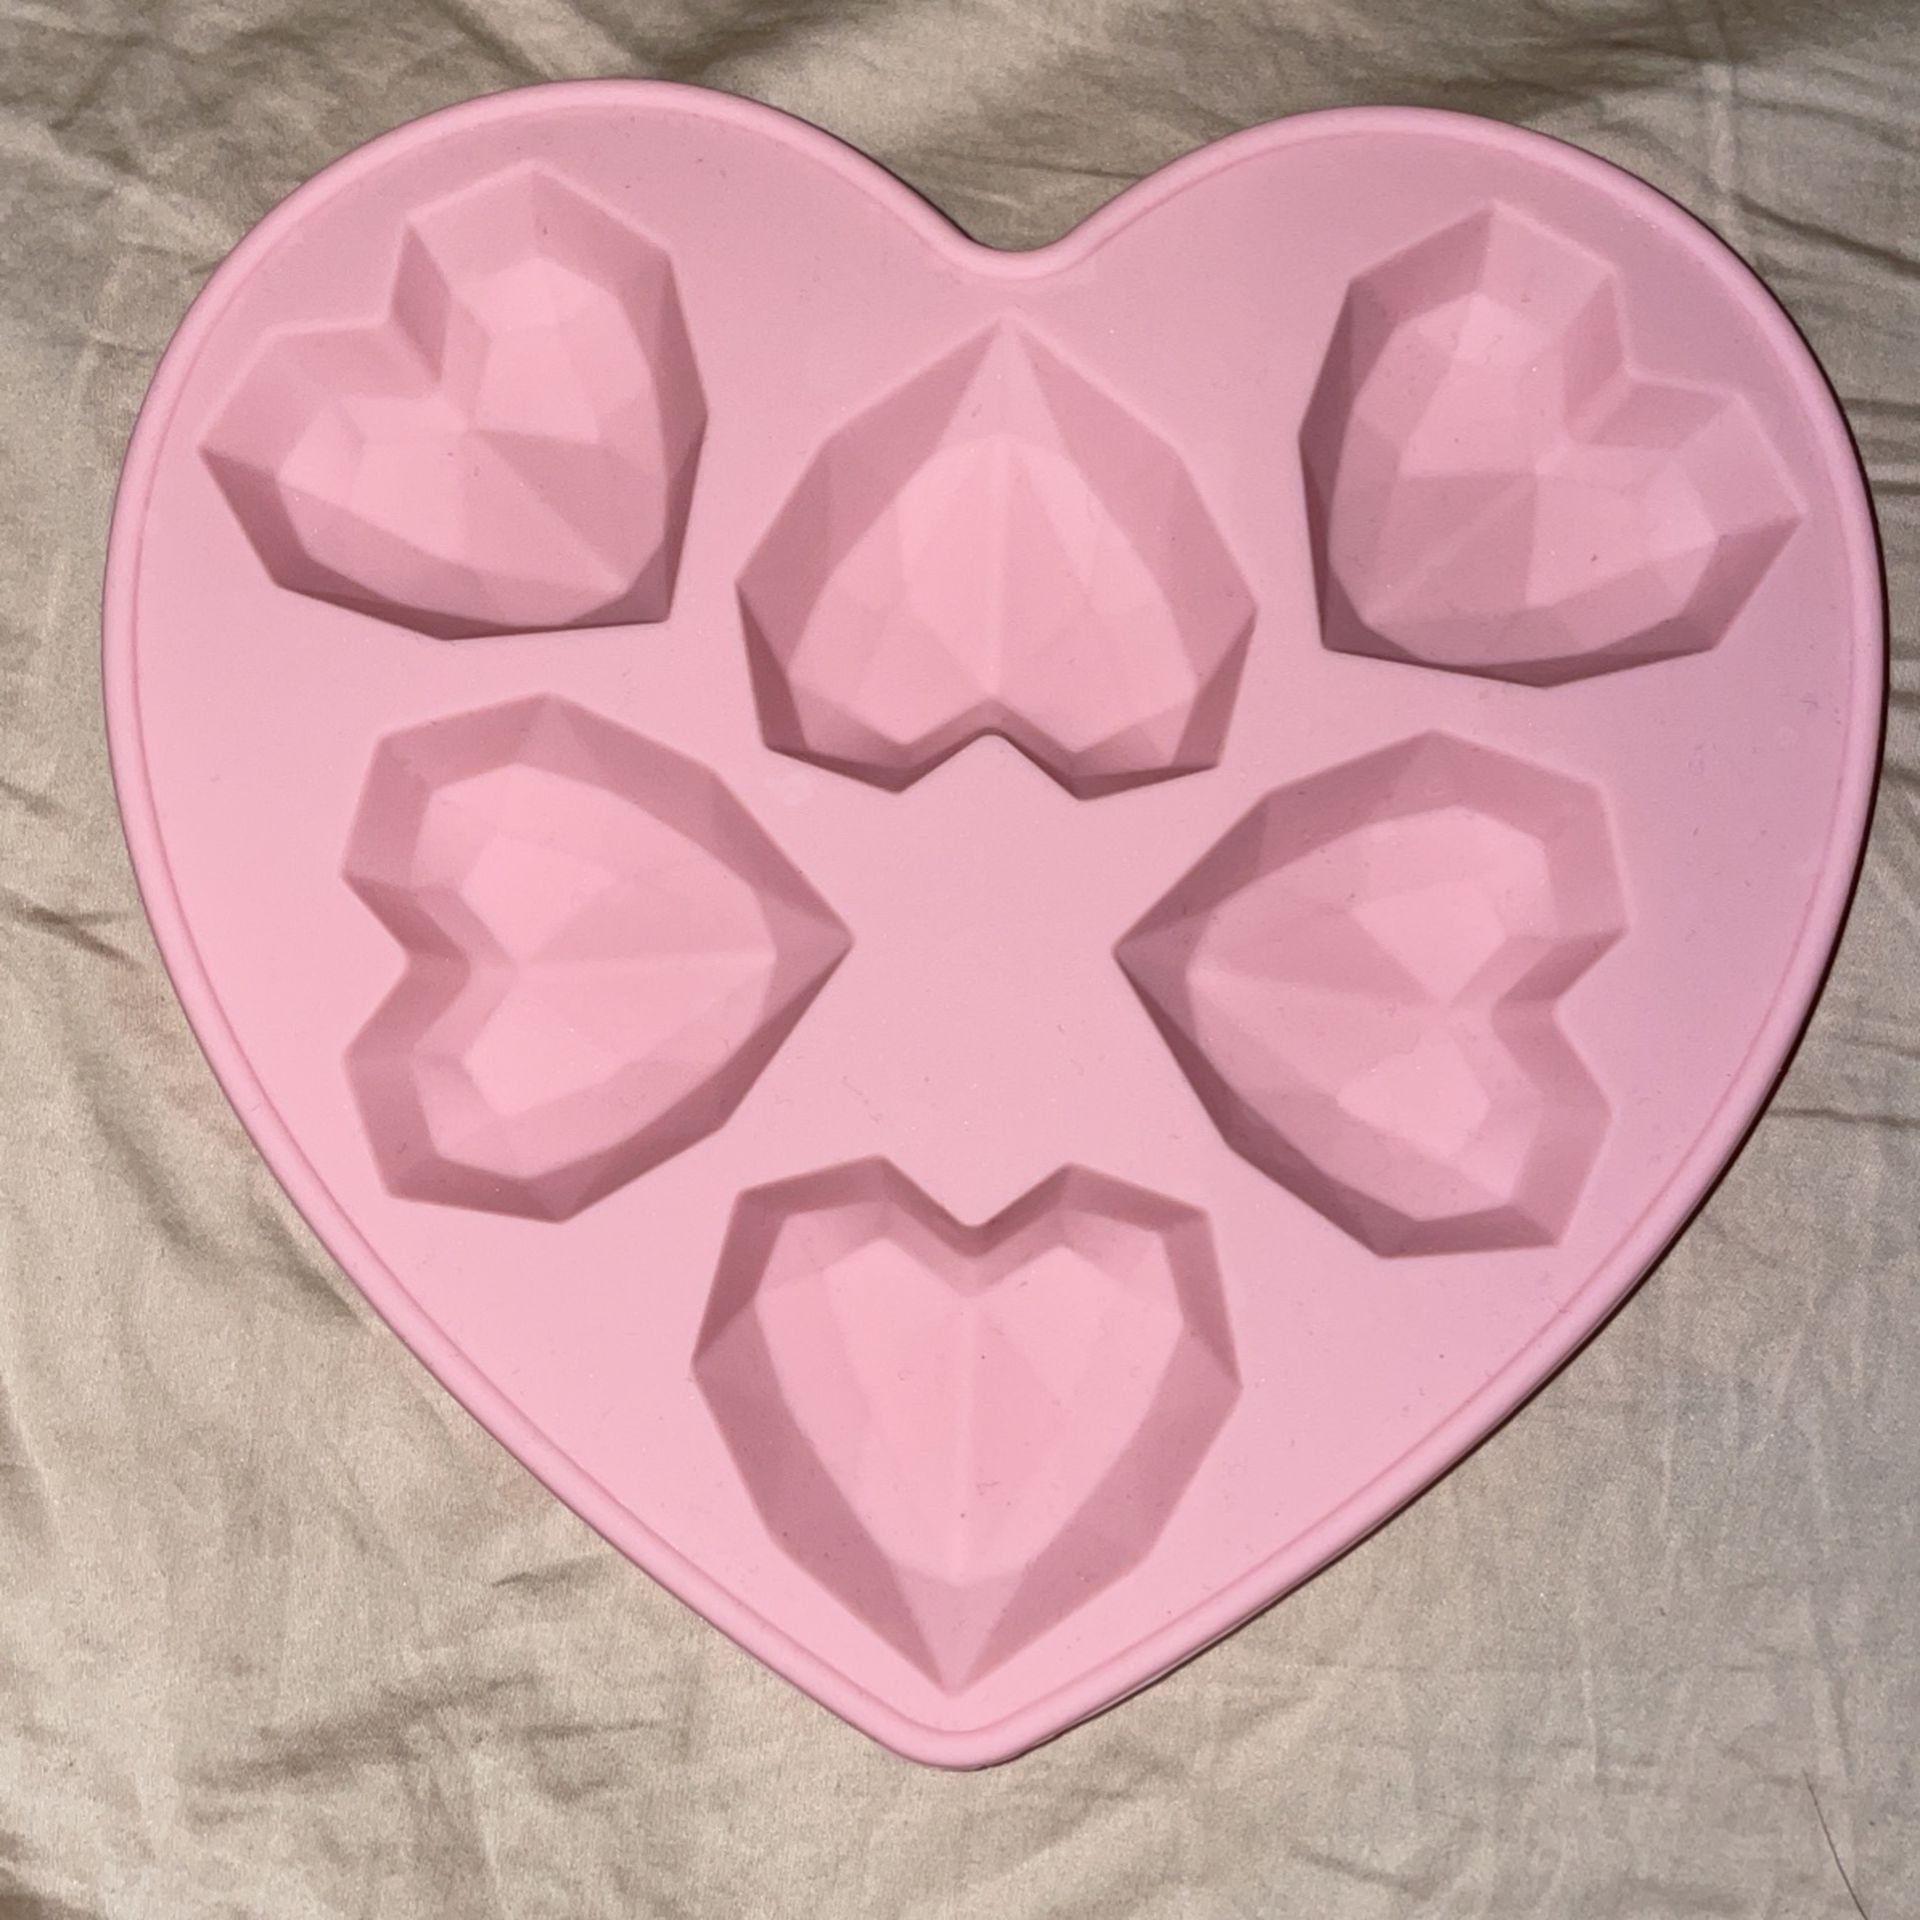 Silicon Heart Molds 